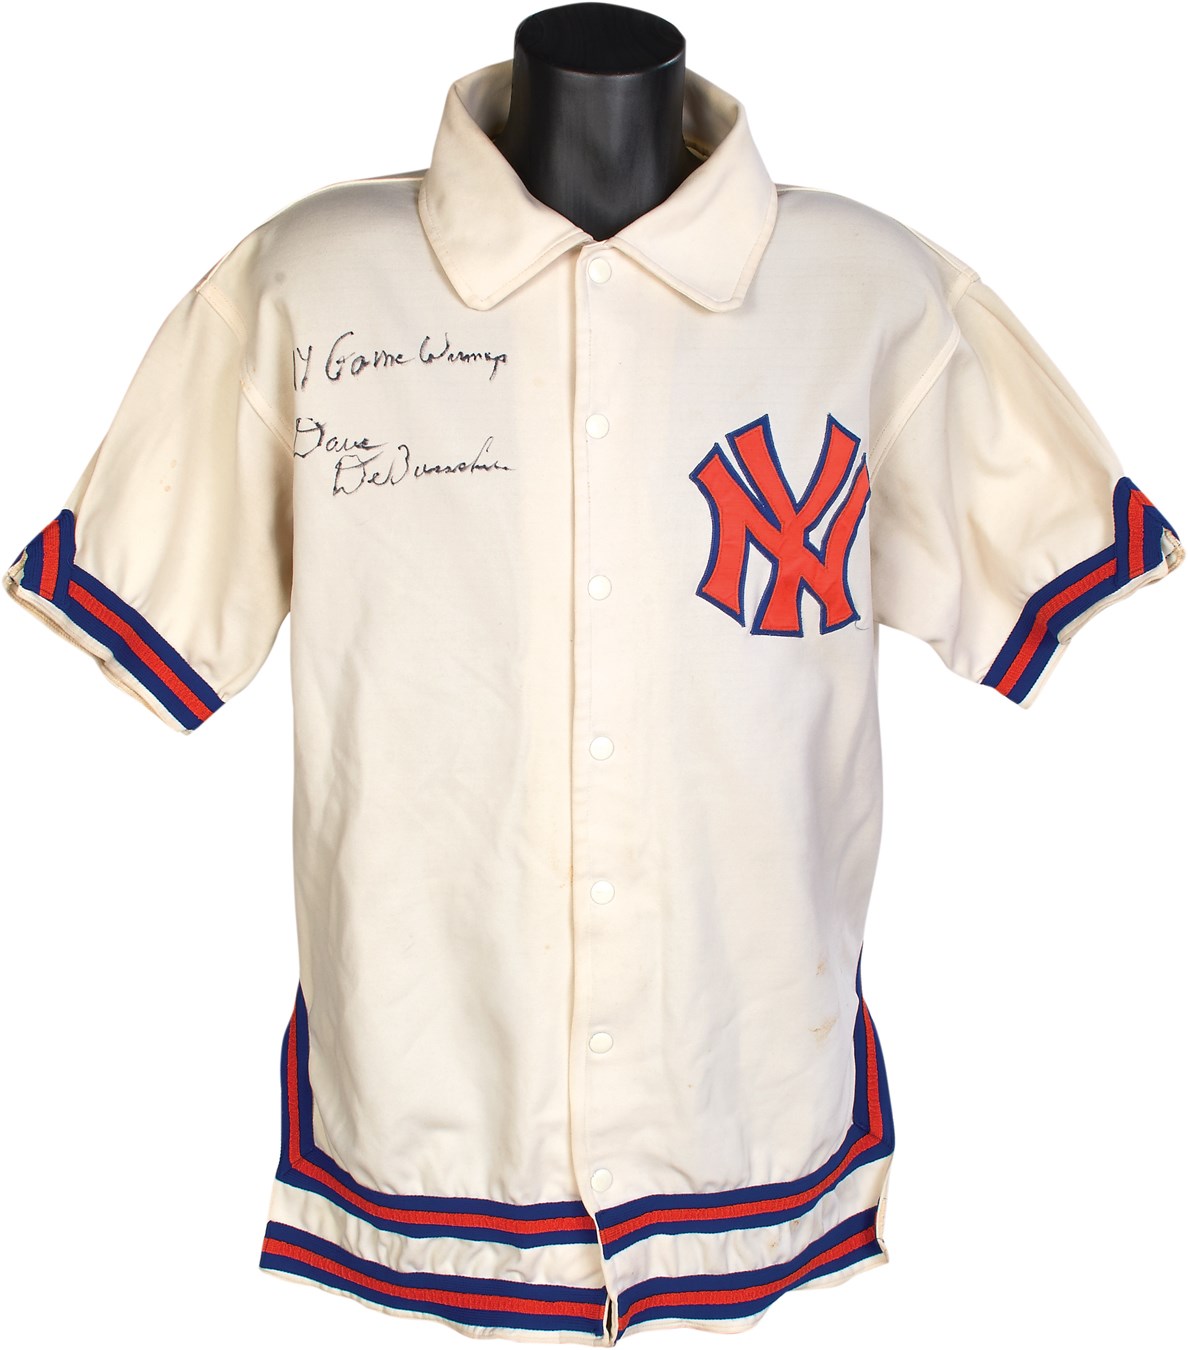 Basketball - Early 1970s Dave DeBusschere New York Knicks Warm Up Top - Photomatched to Last Regular Season Game